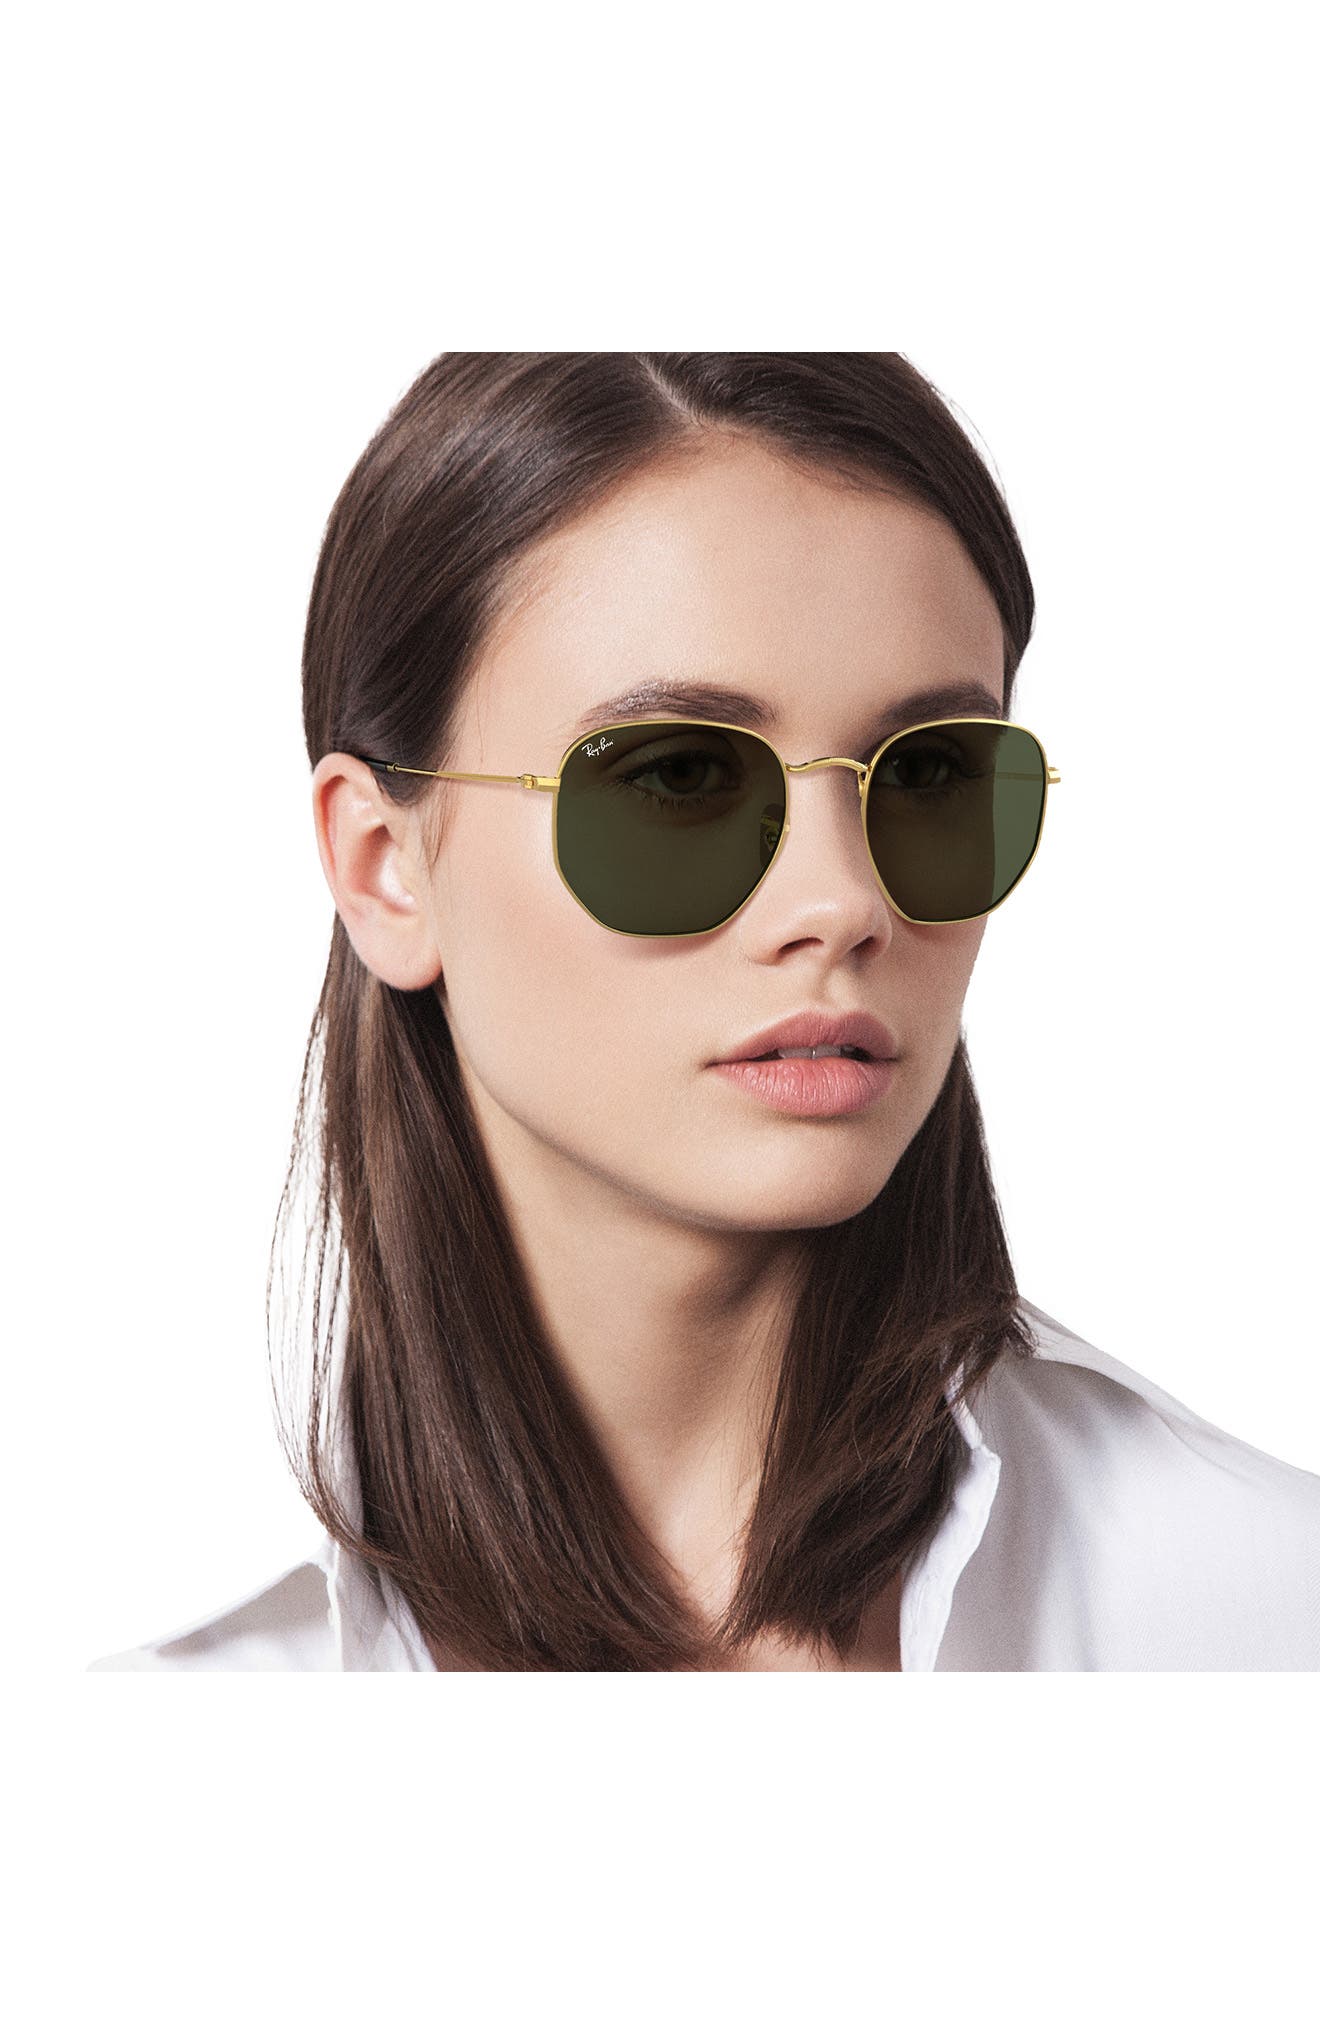 Ray-Ban Aviator Classic Sunglasses RB3025 L0205 - Polished Gold Frame - Green Classic G-15 Lenses - 58mm